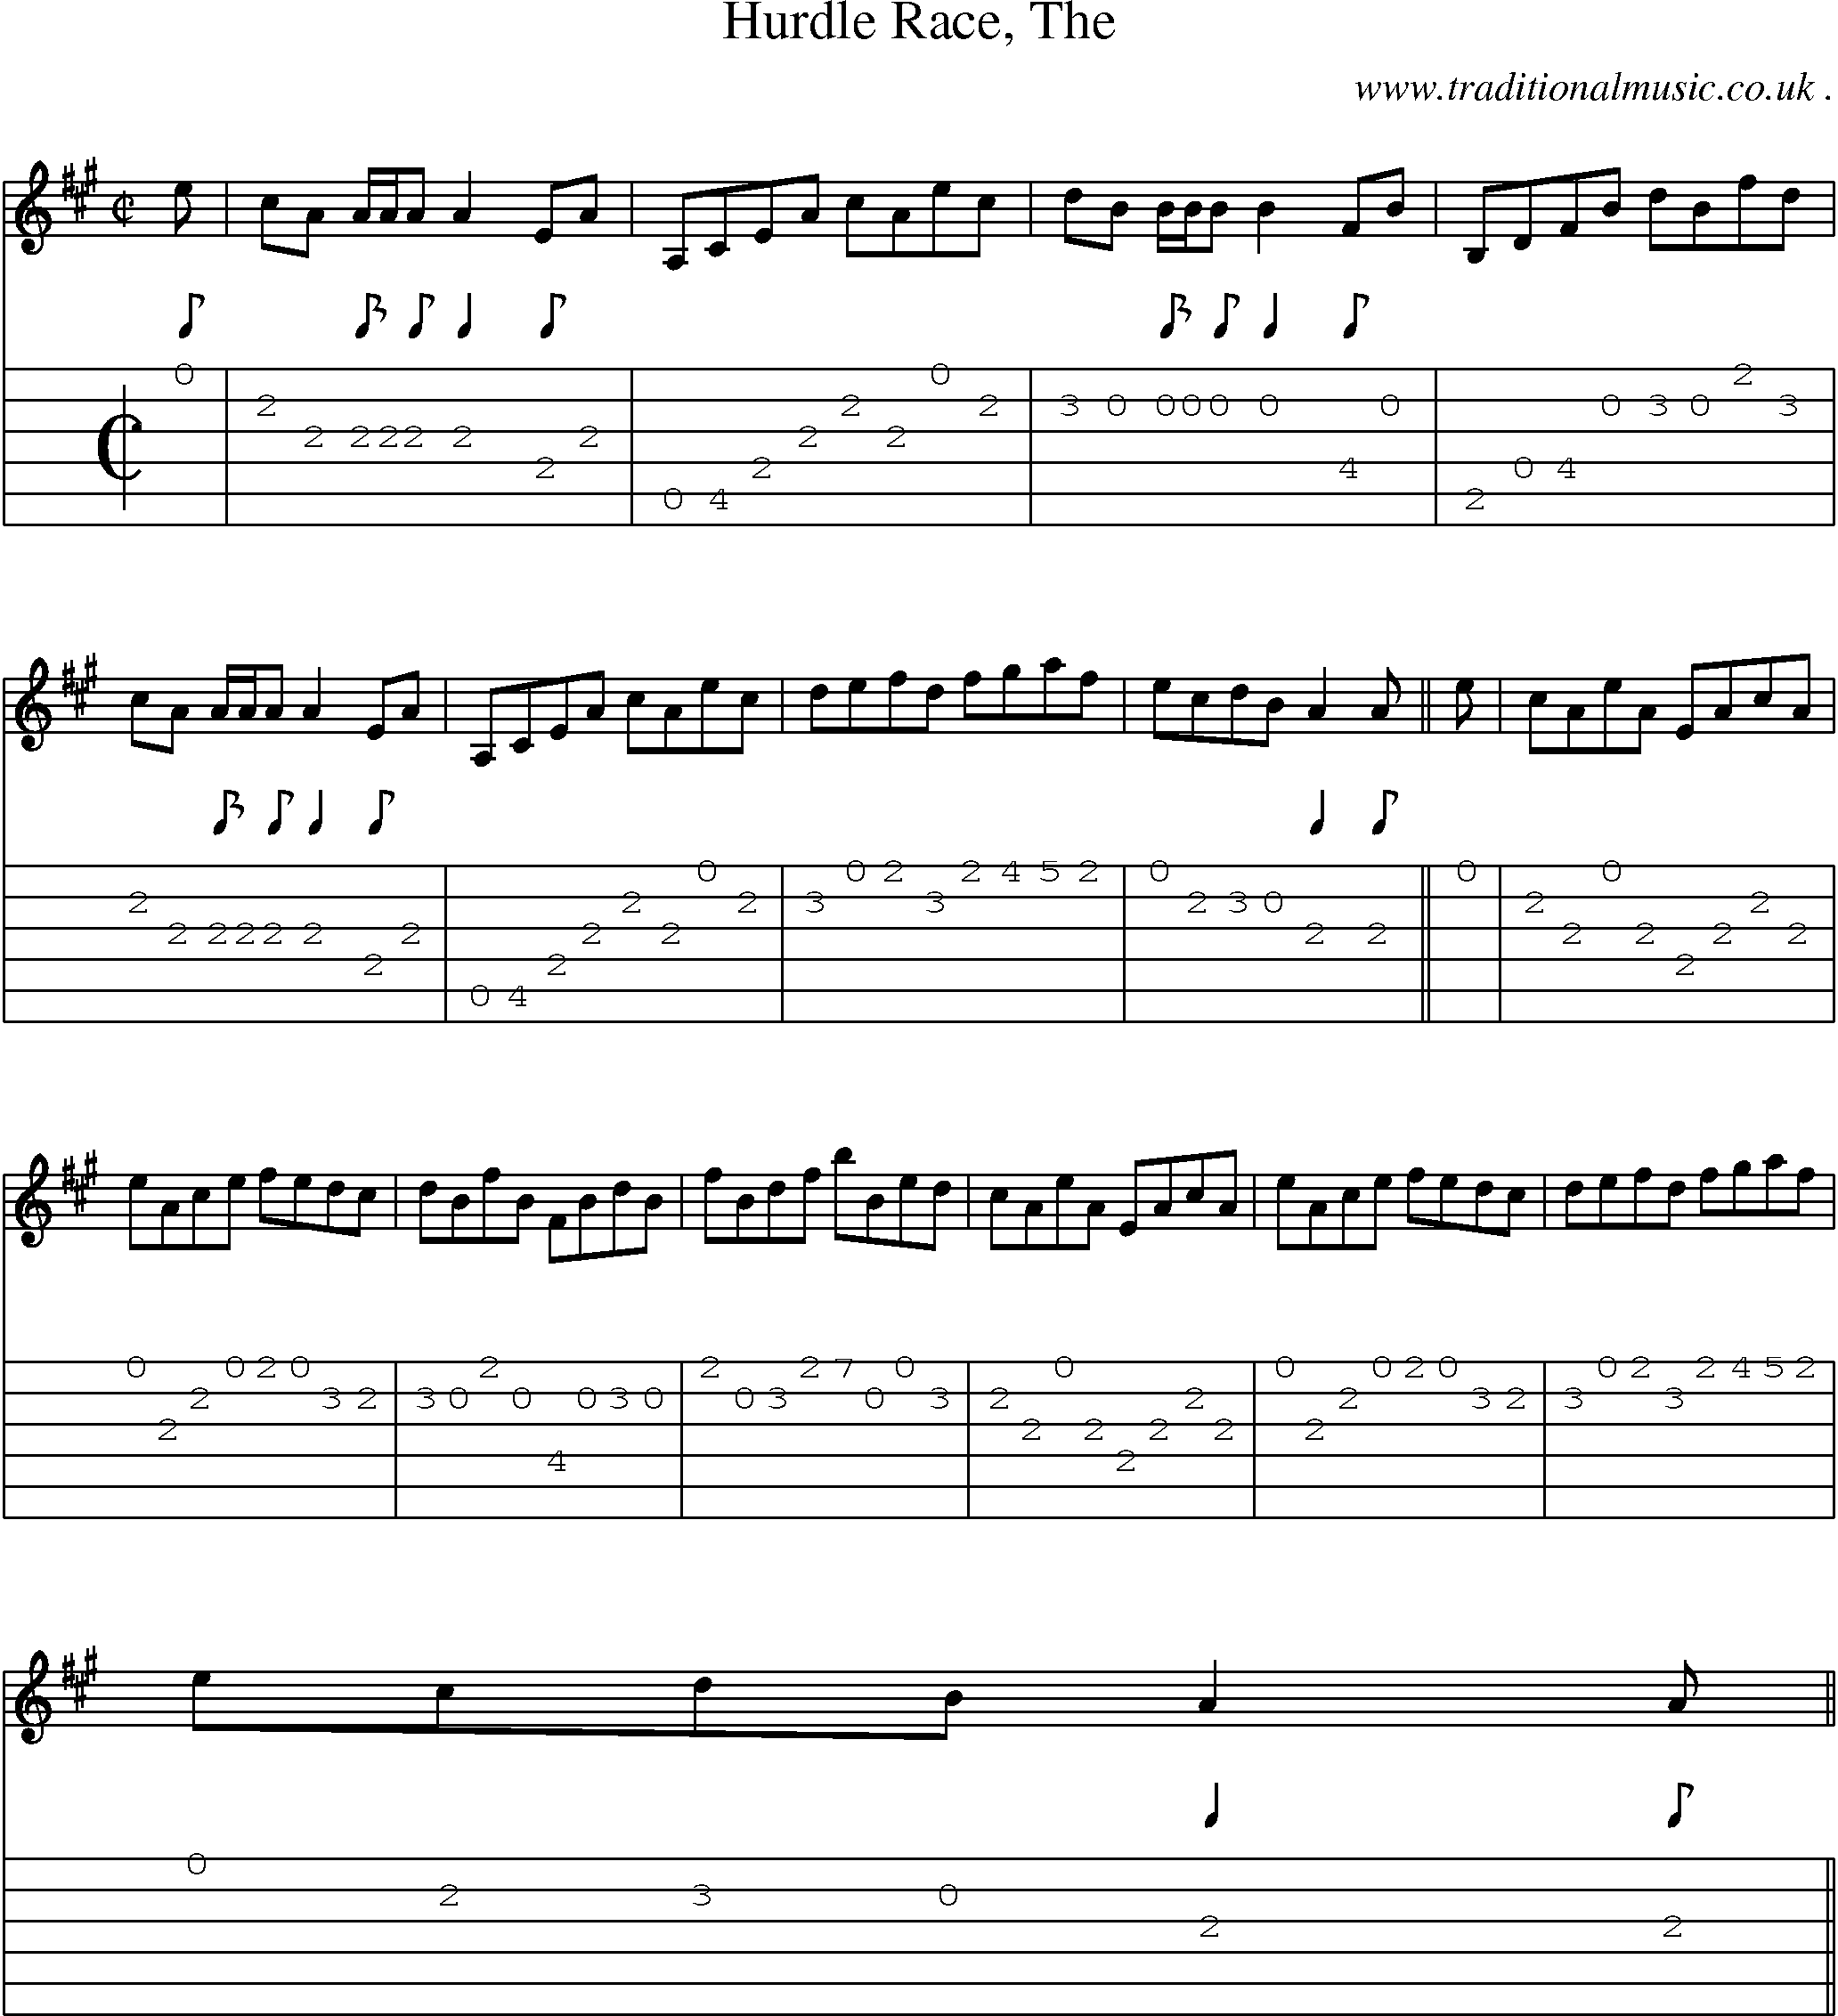 Sheet-music  score, Chords and Guitar Tabs for Hurdle Race The